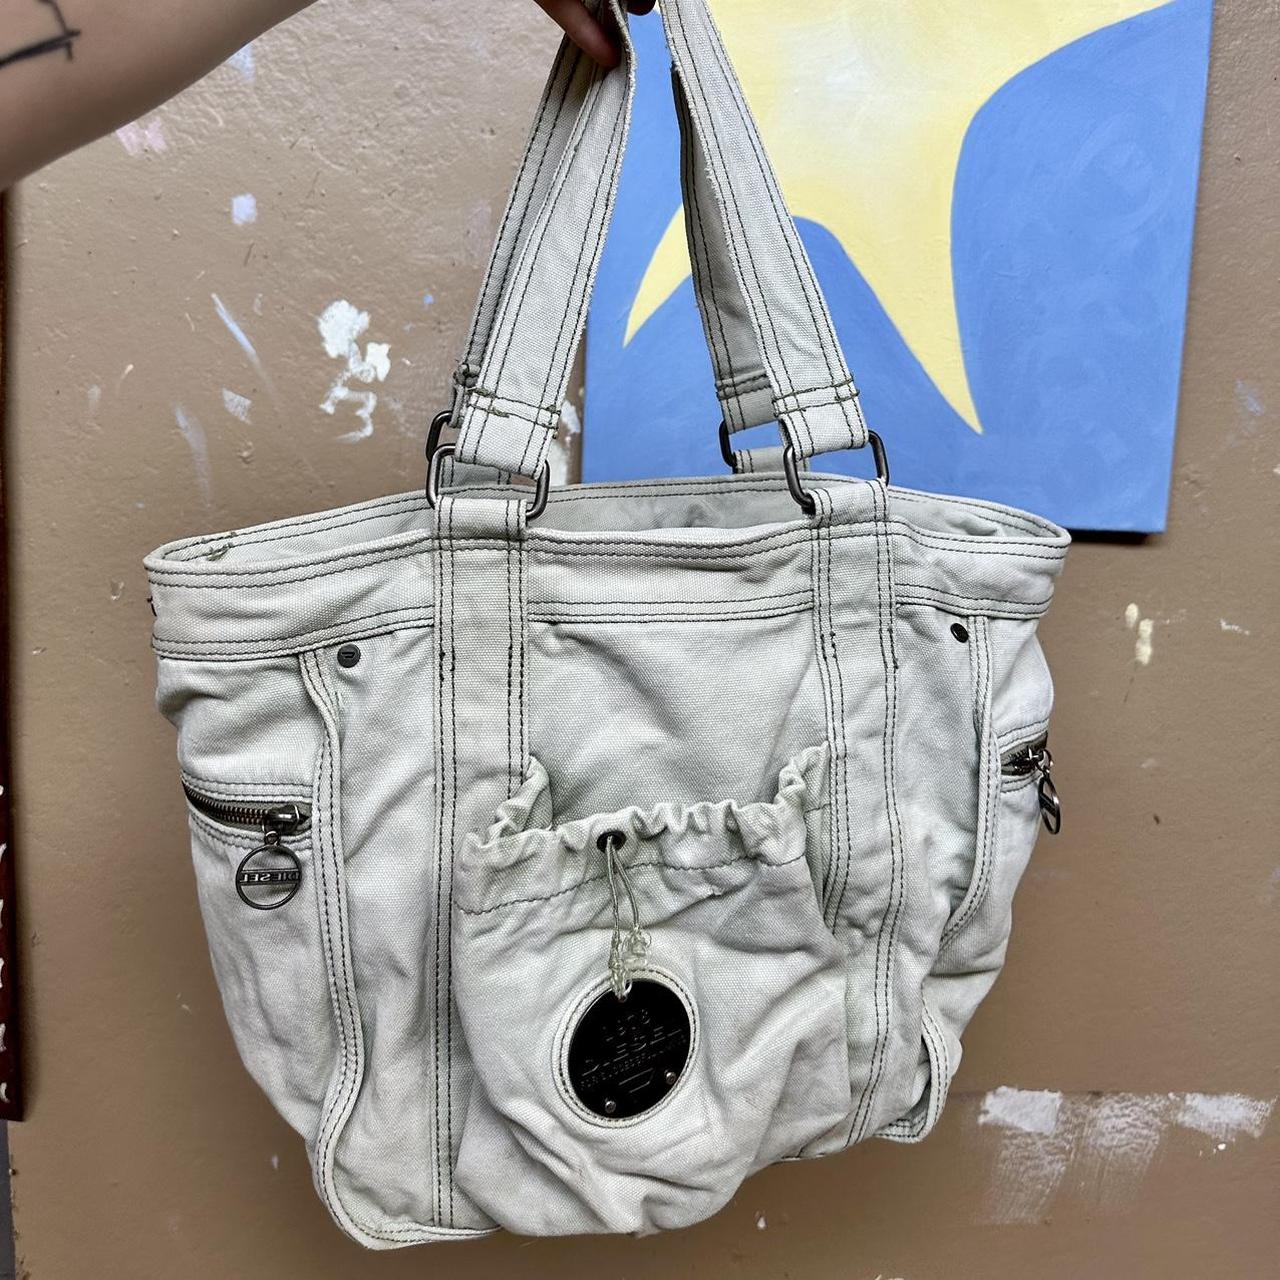 Diesel tote bag, some stains and discoloration— color